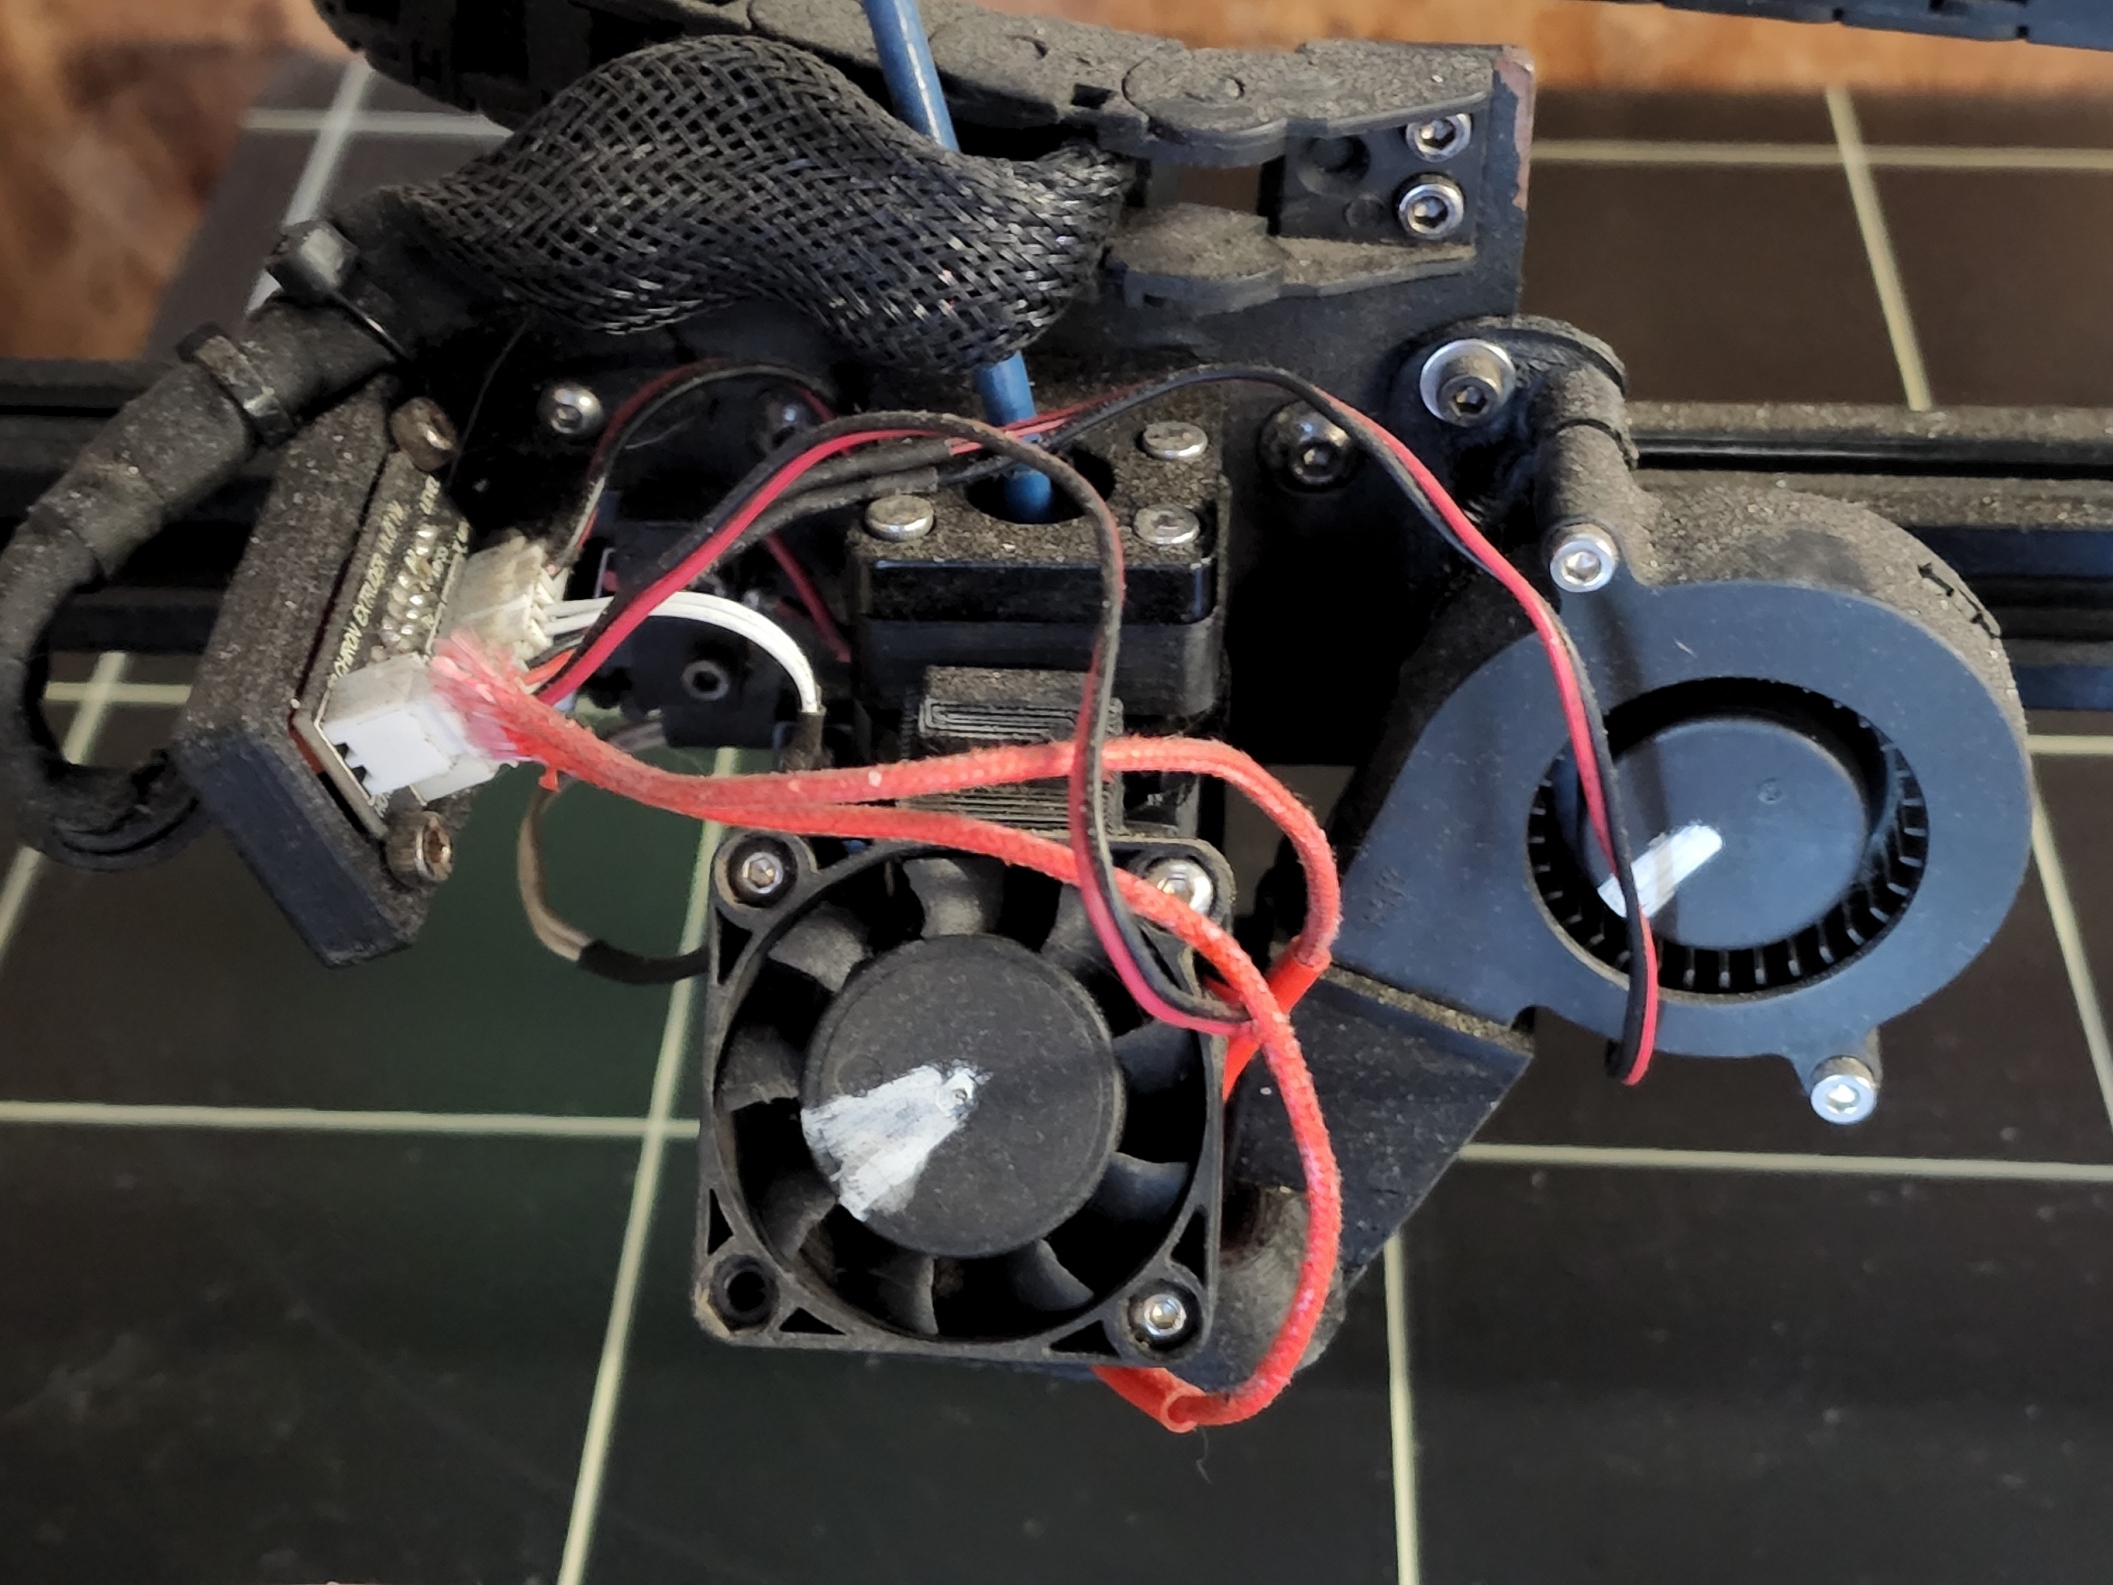 Anycubic Chiron Ultimate Extruder remix